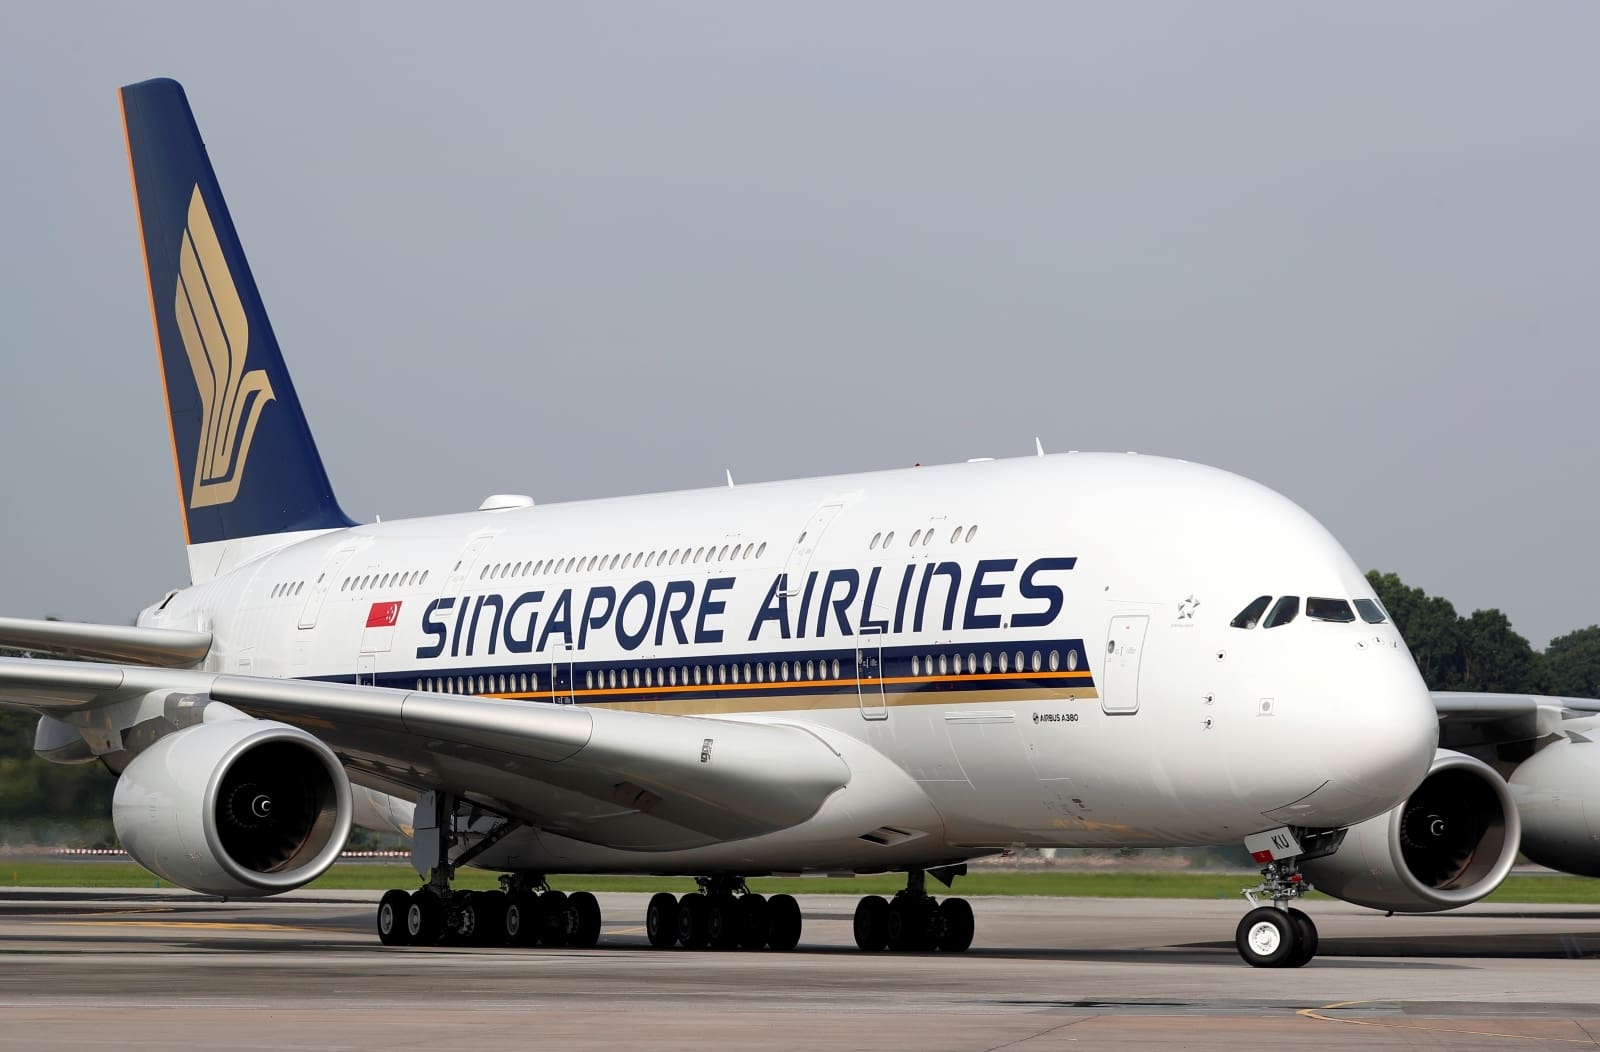 One dead, 30 injured as Singapore Airlines hit by severe turbulence